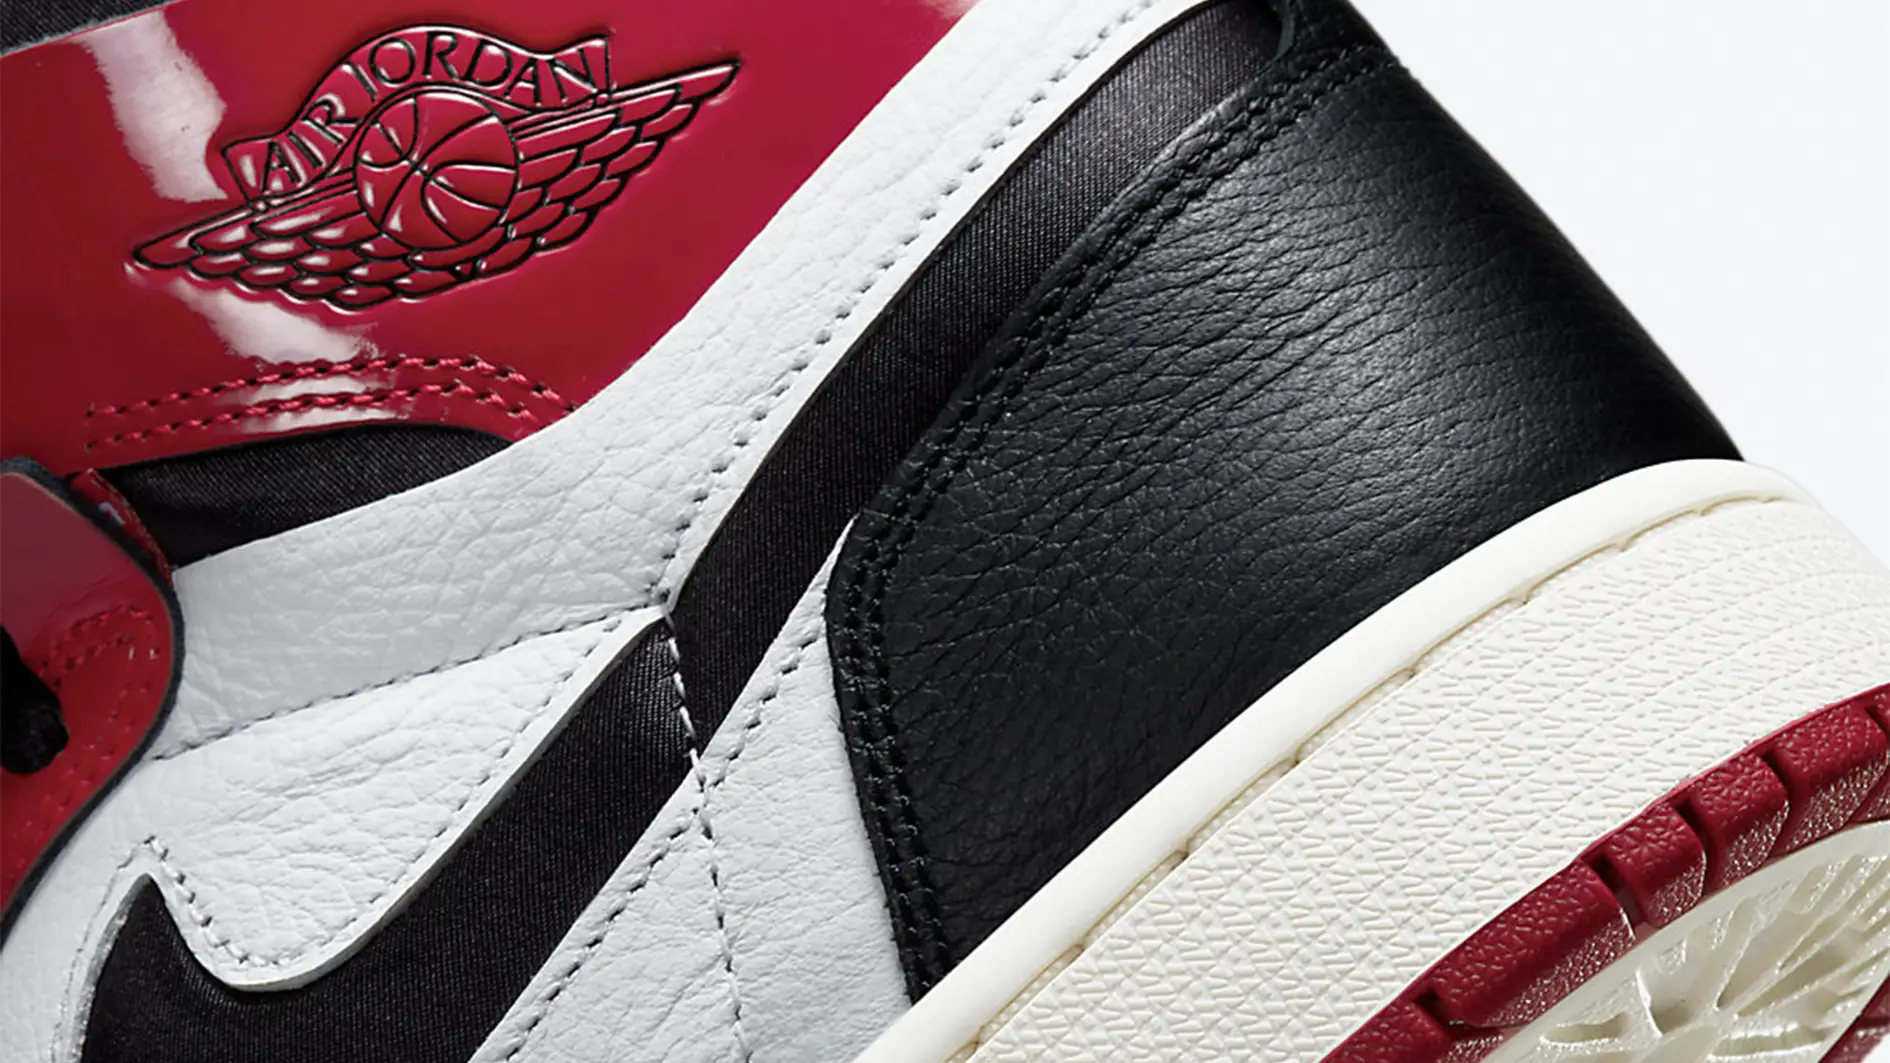 The Jordan 1 Zoom CMFT Gets Coloured in Chicago Hues | The Sole Supplier